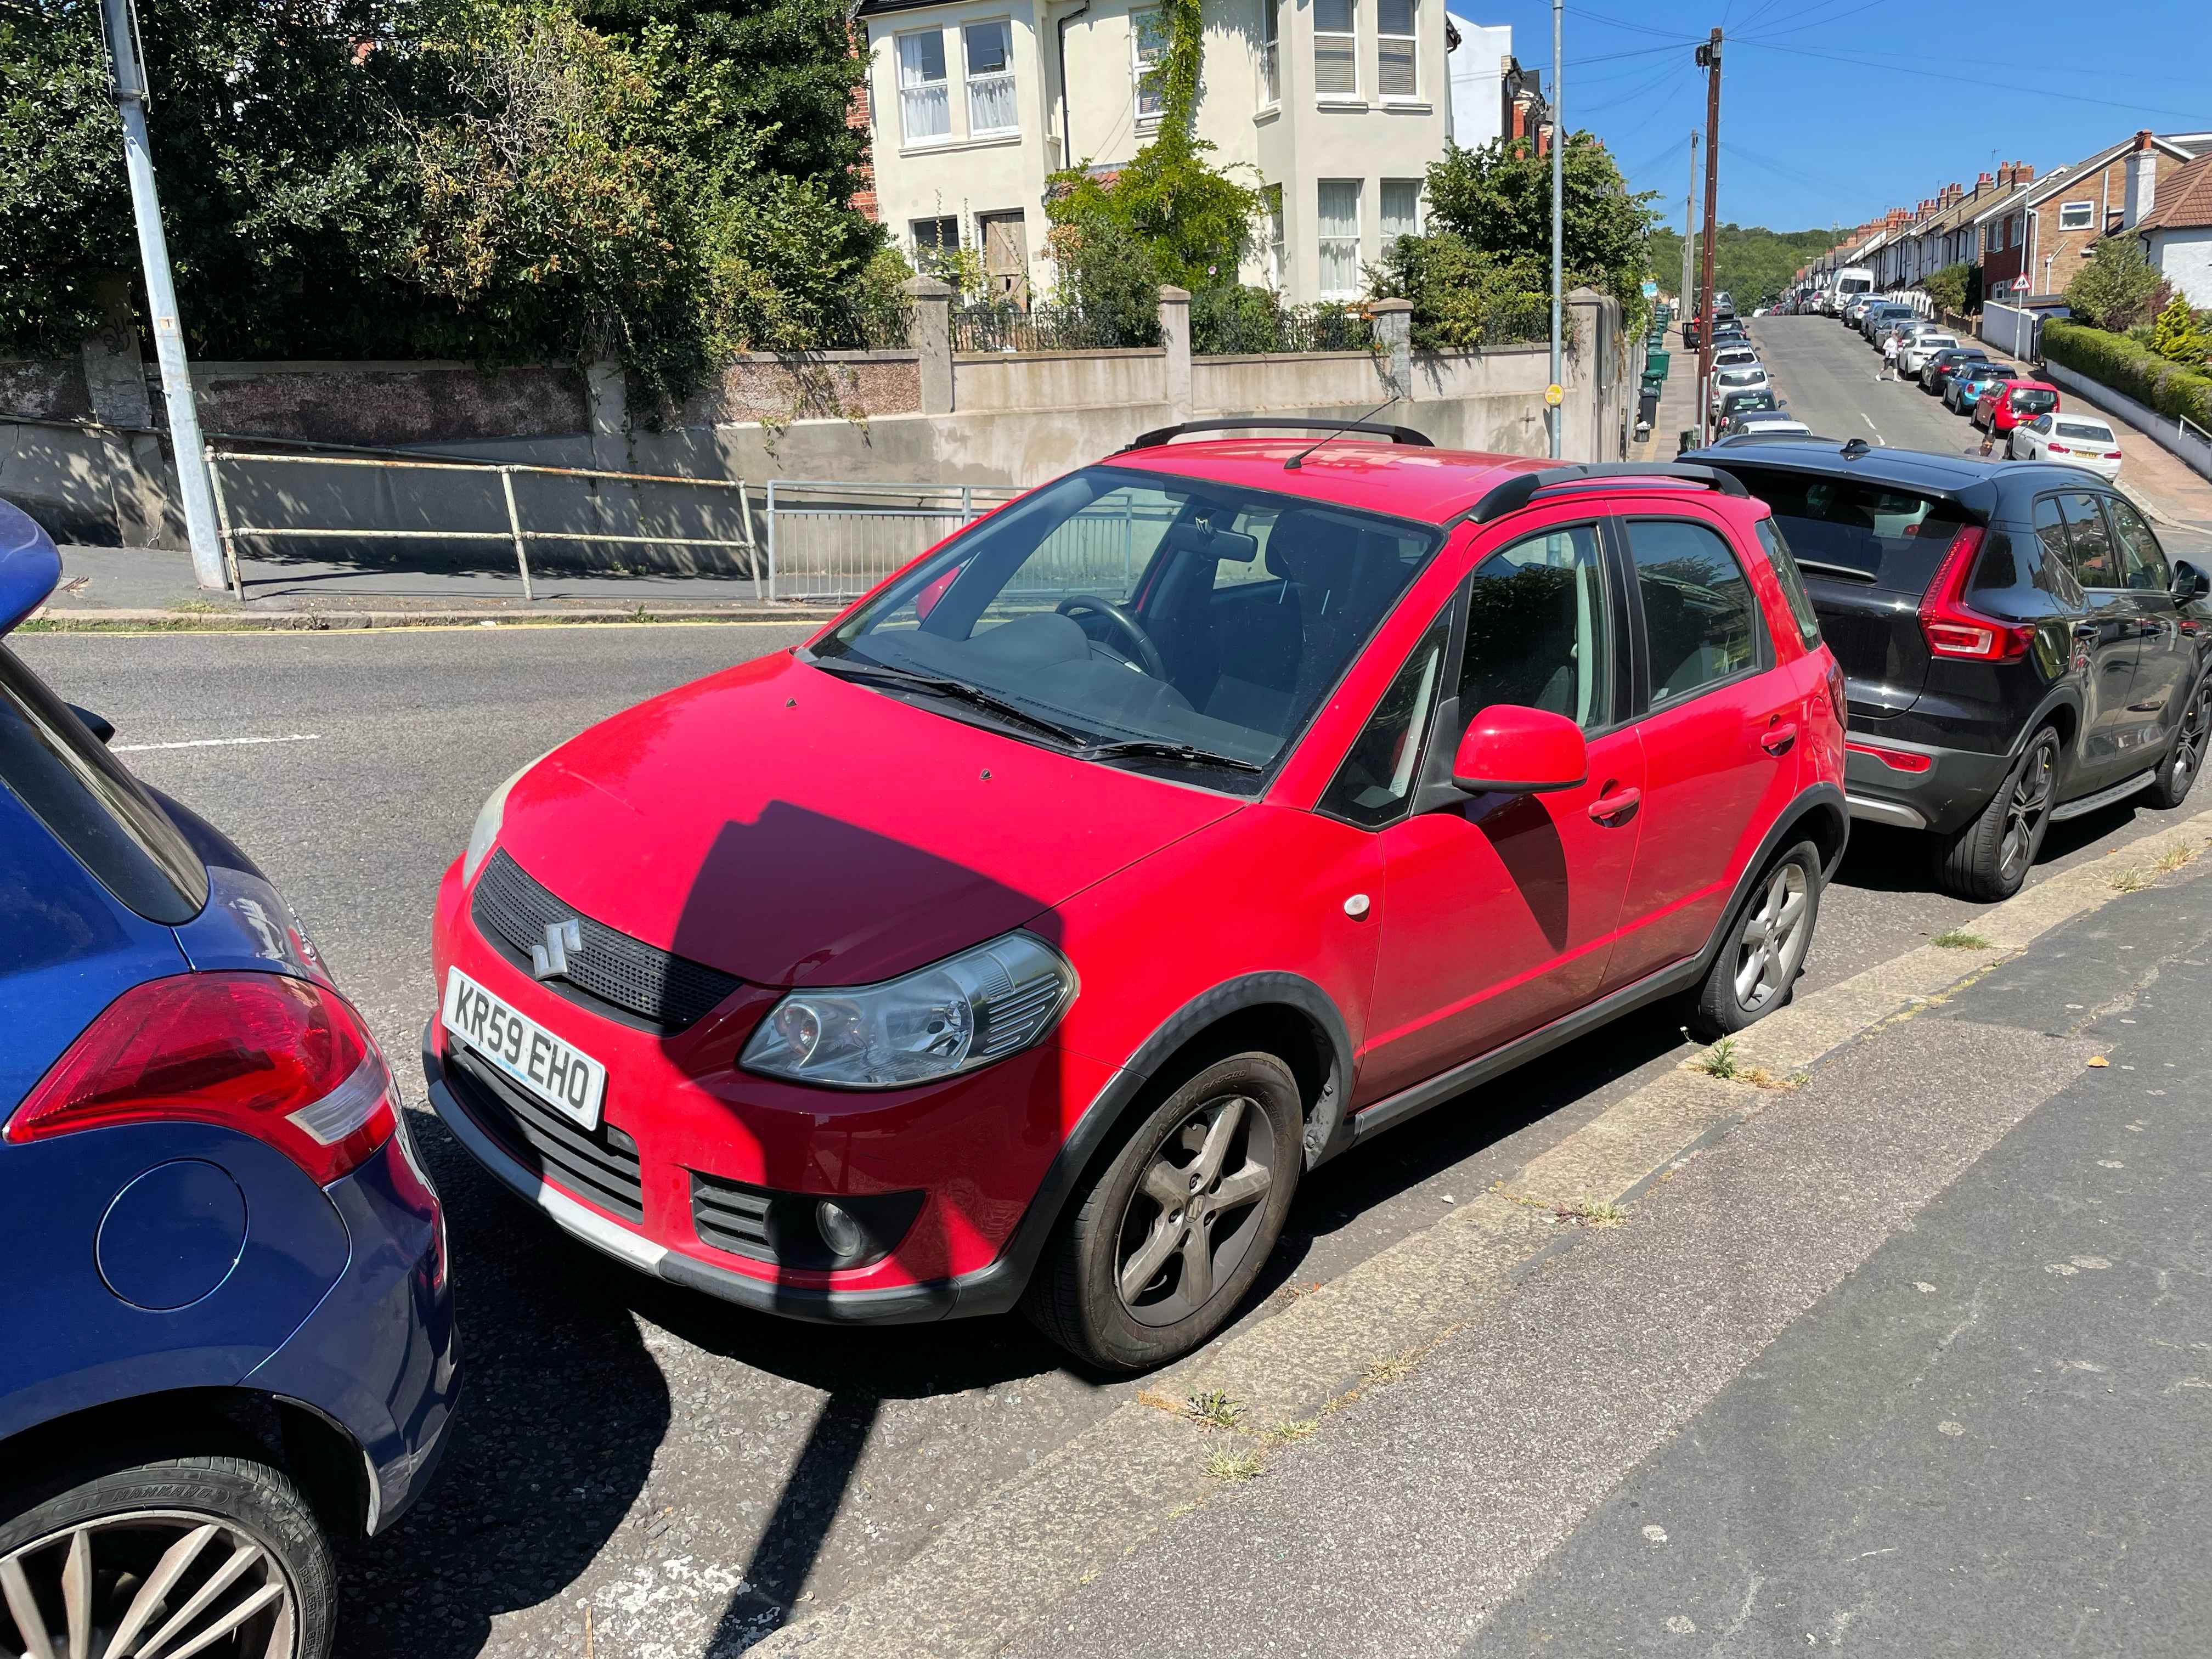 Photograph of KR59 EHO - a Red Suzuki SX4 parked in Hollingdean by a non-resident who uses the local area as part of their Brighton commute. The second of four photographs supplied by the residents of Hollingdean.